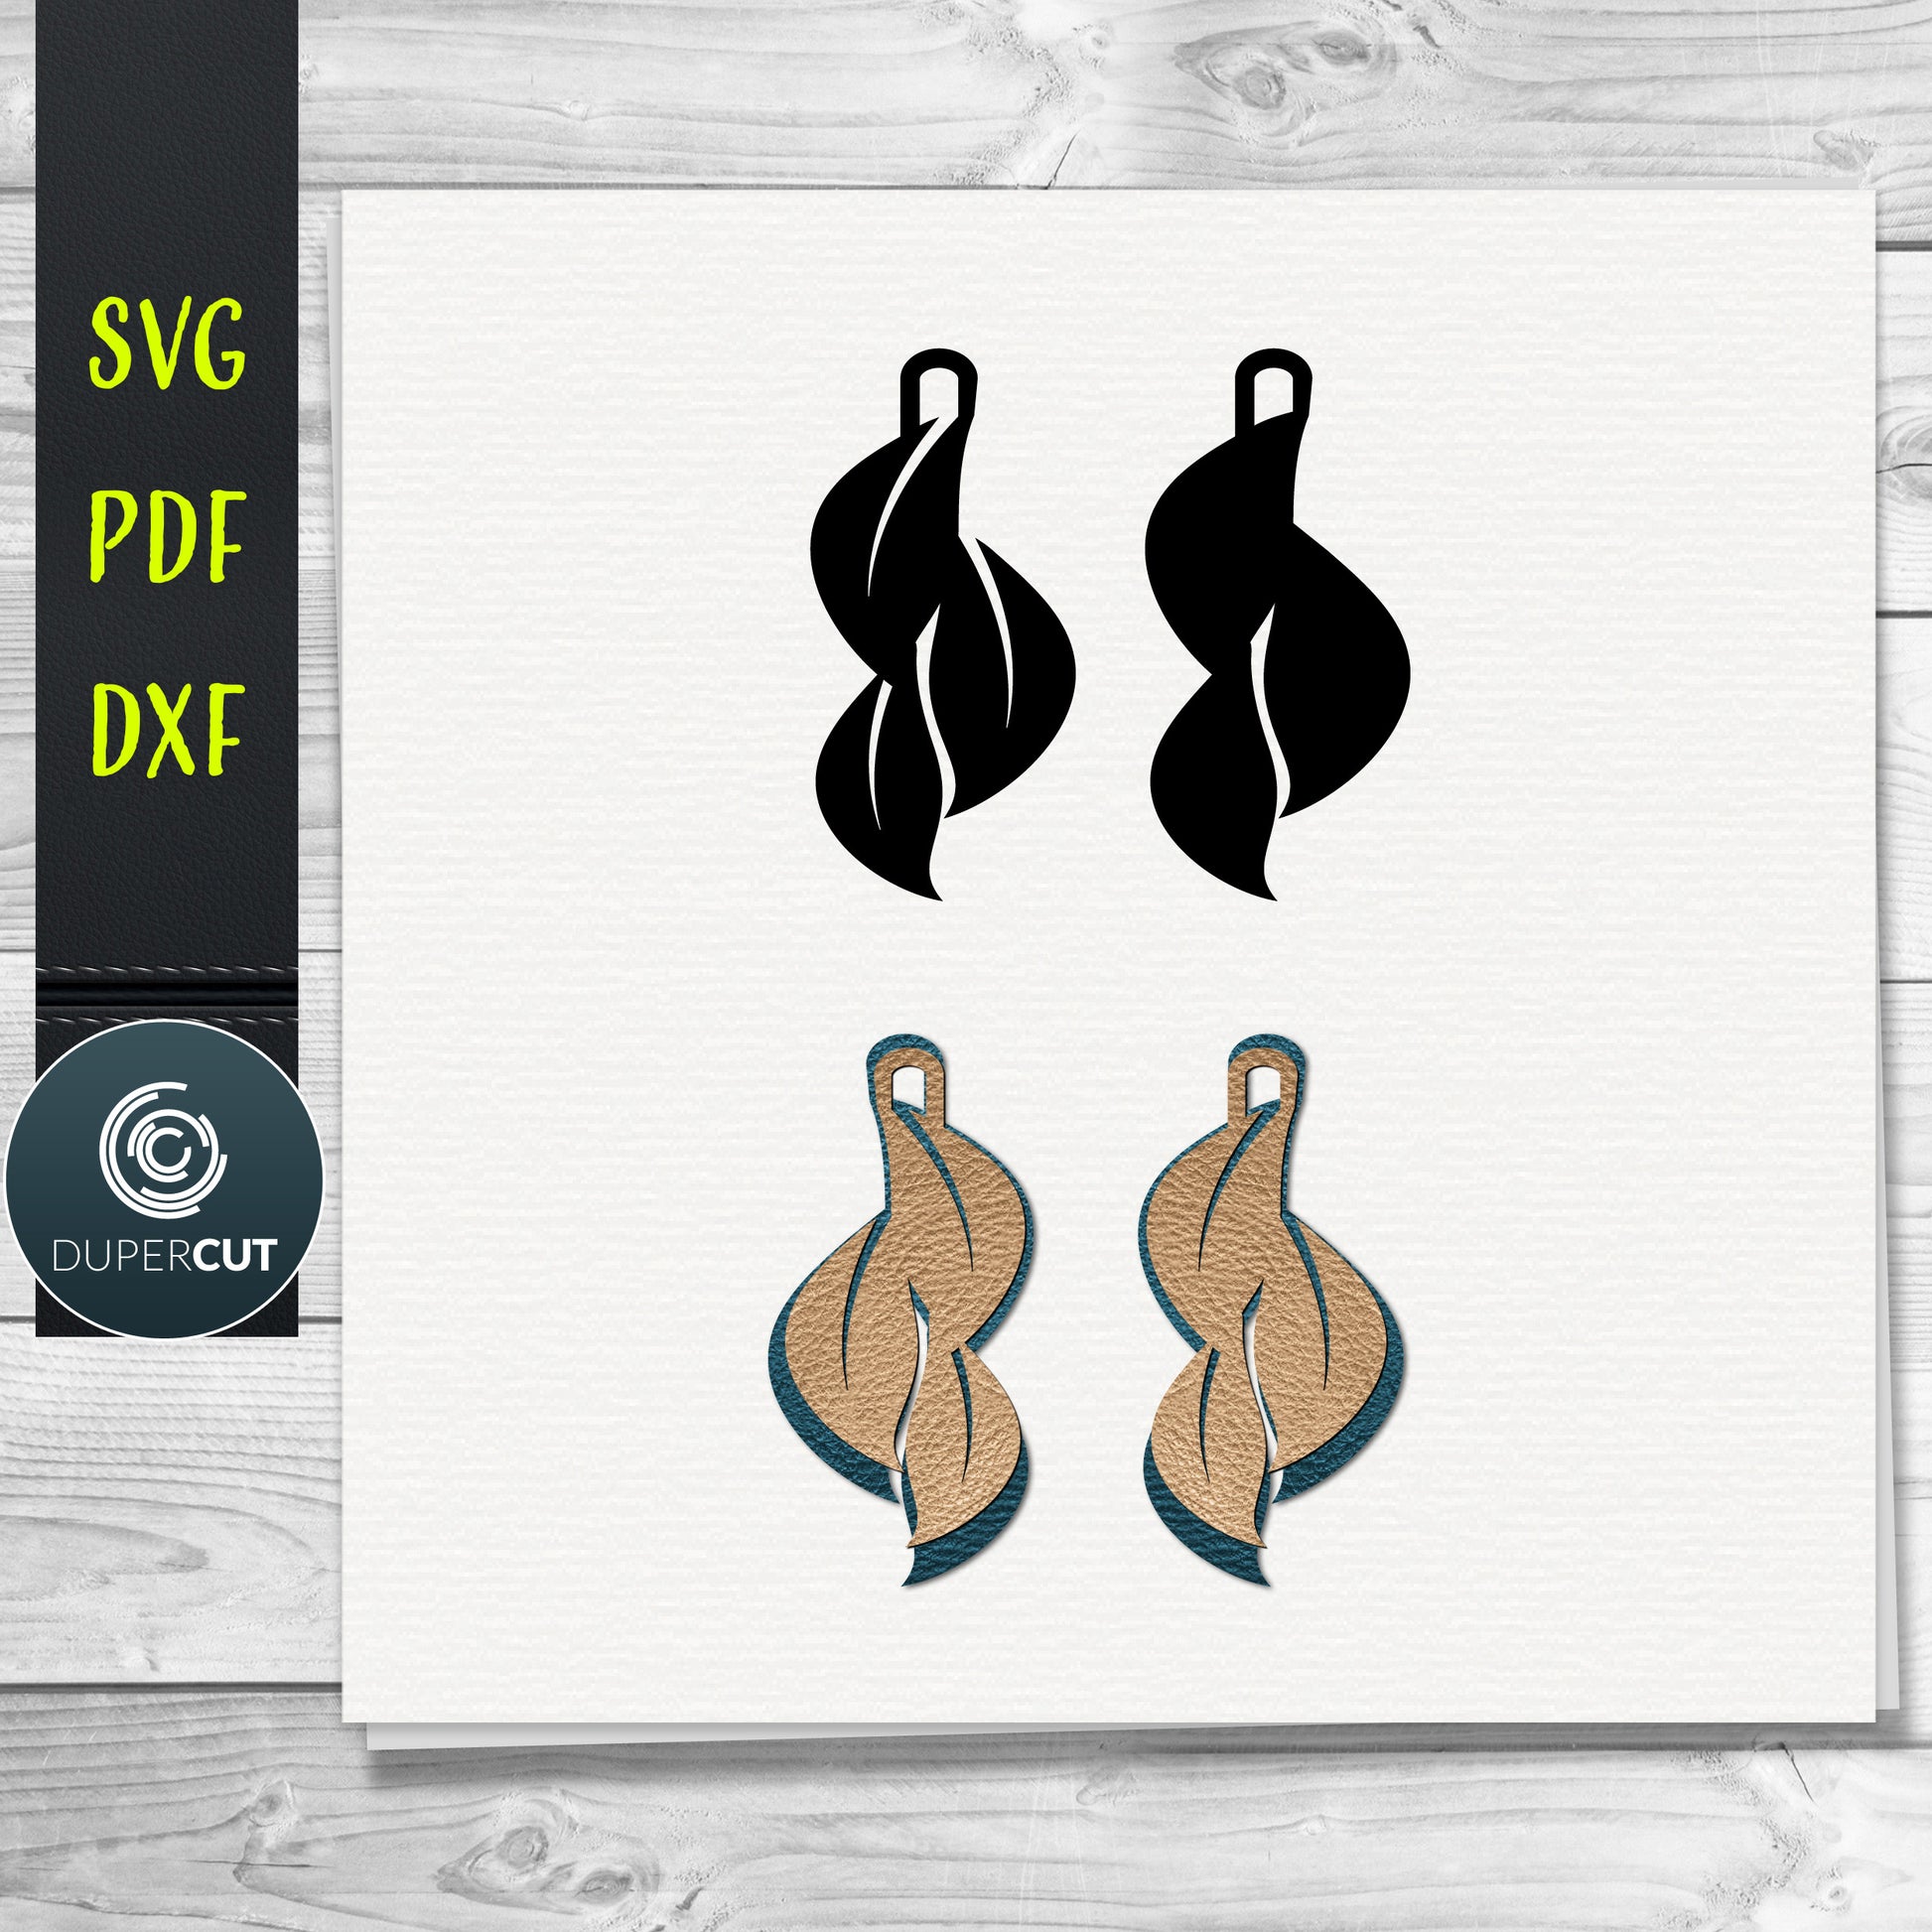 DIY Floral Leaves Layered Leather Wood Earrings SVG PDF DXF vector files. Jewellery making template for laser and cutting machines - Glowforge, Cricut, Silhouette Cameo.